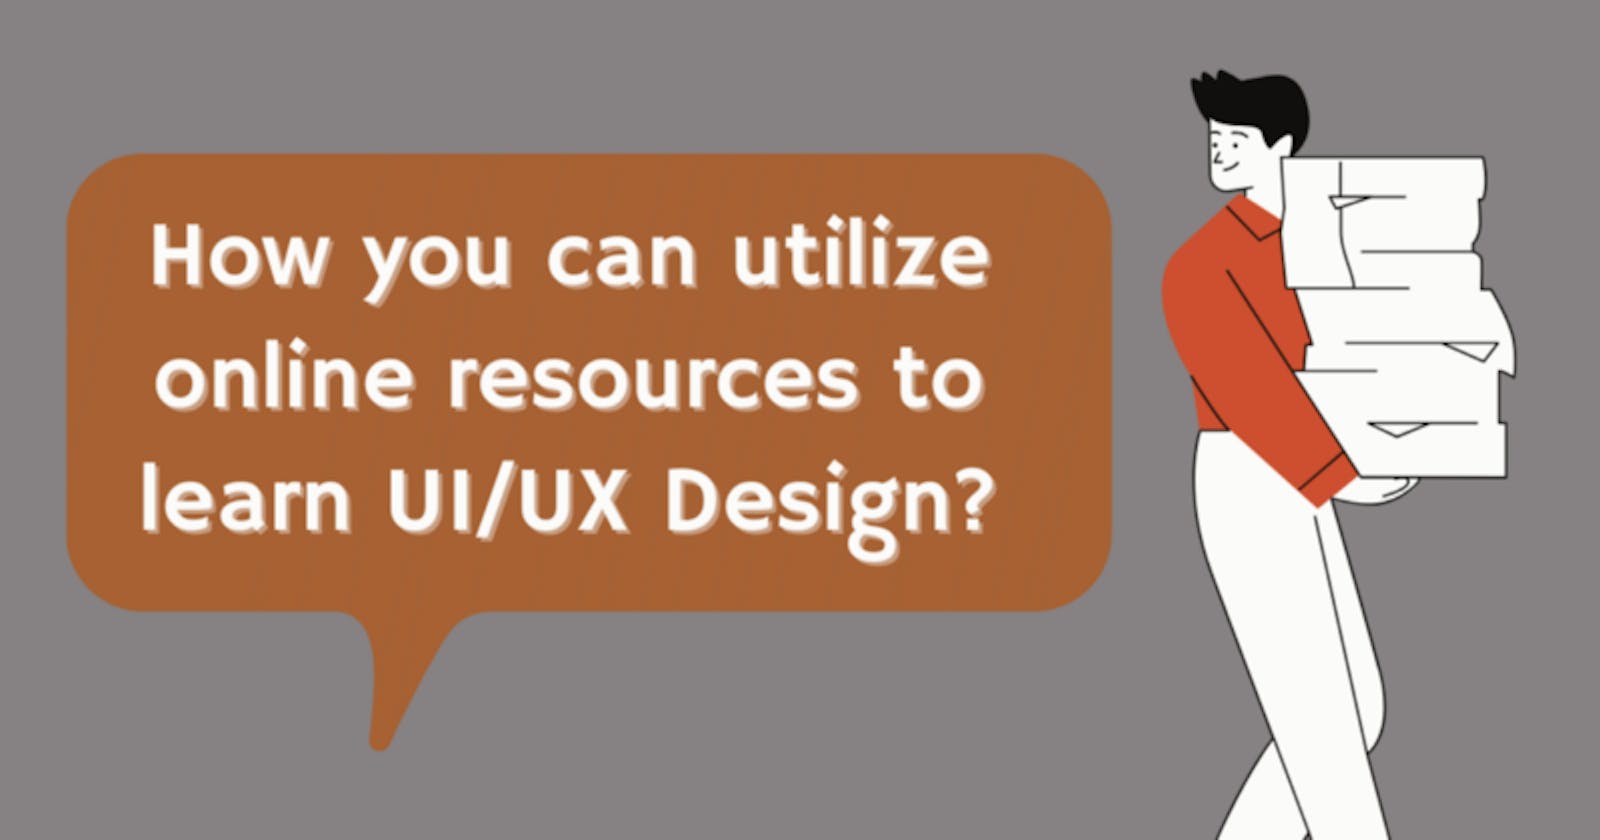 How you can utilize online resources to learn UI/UX Design?